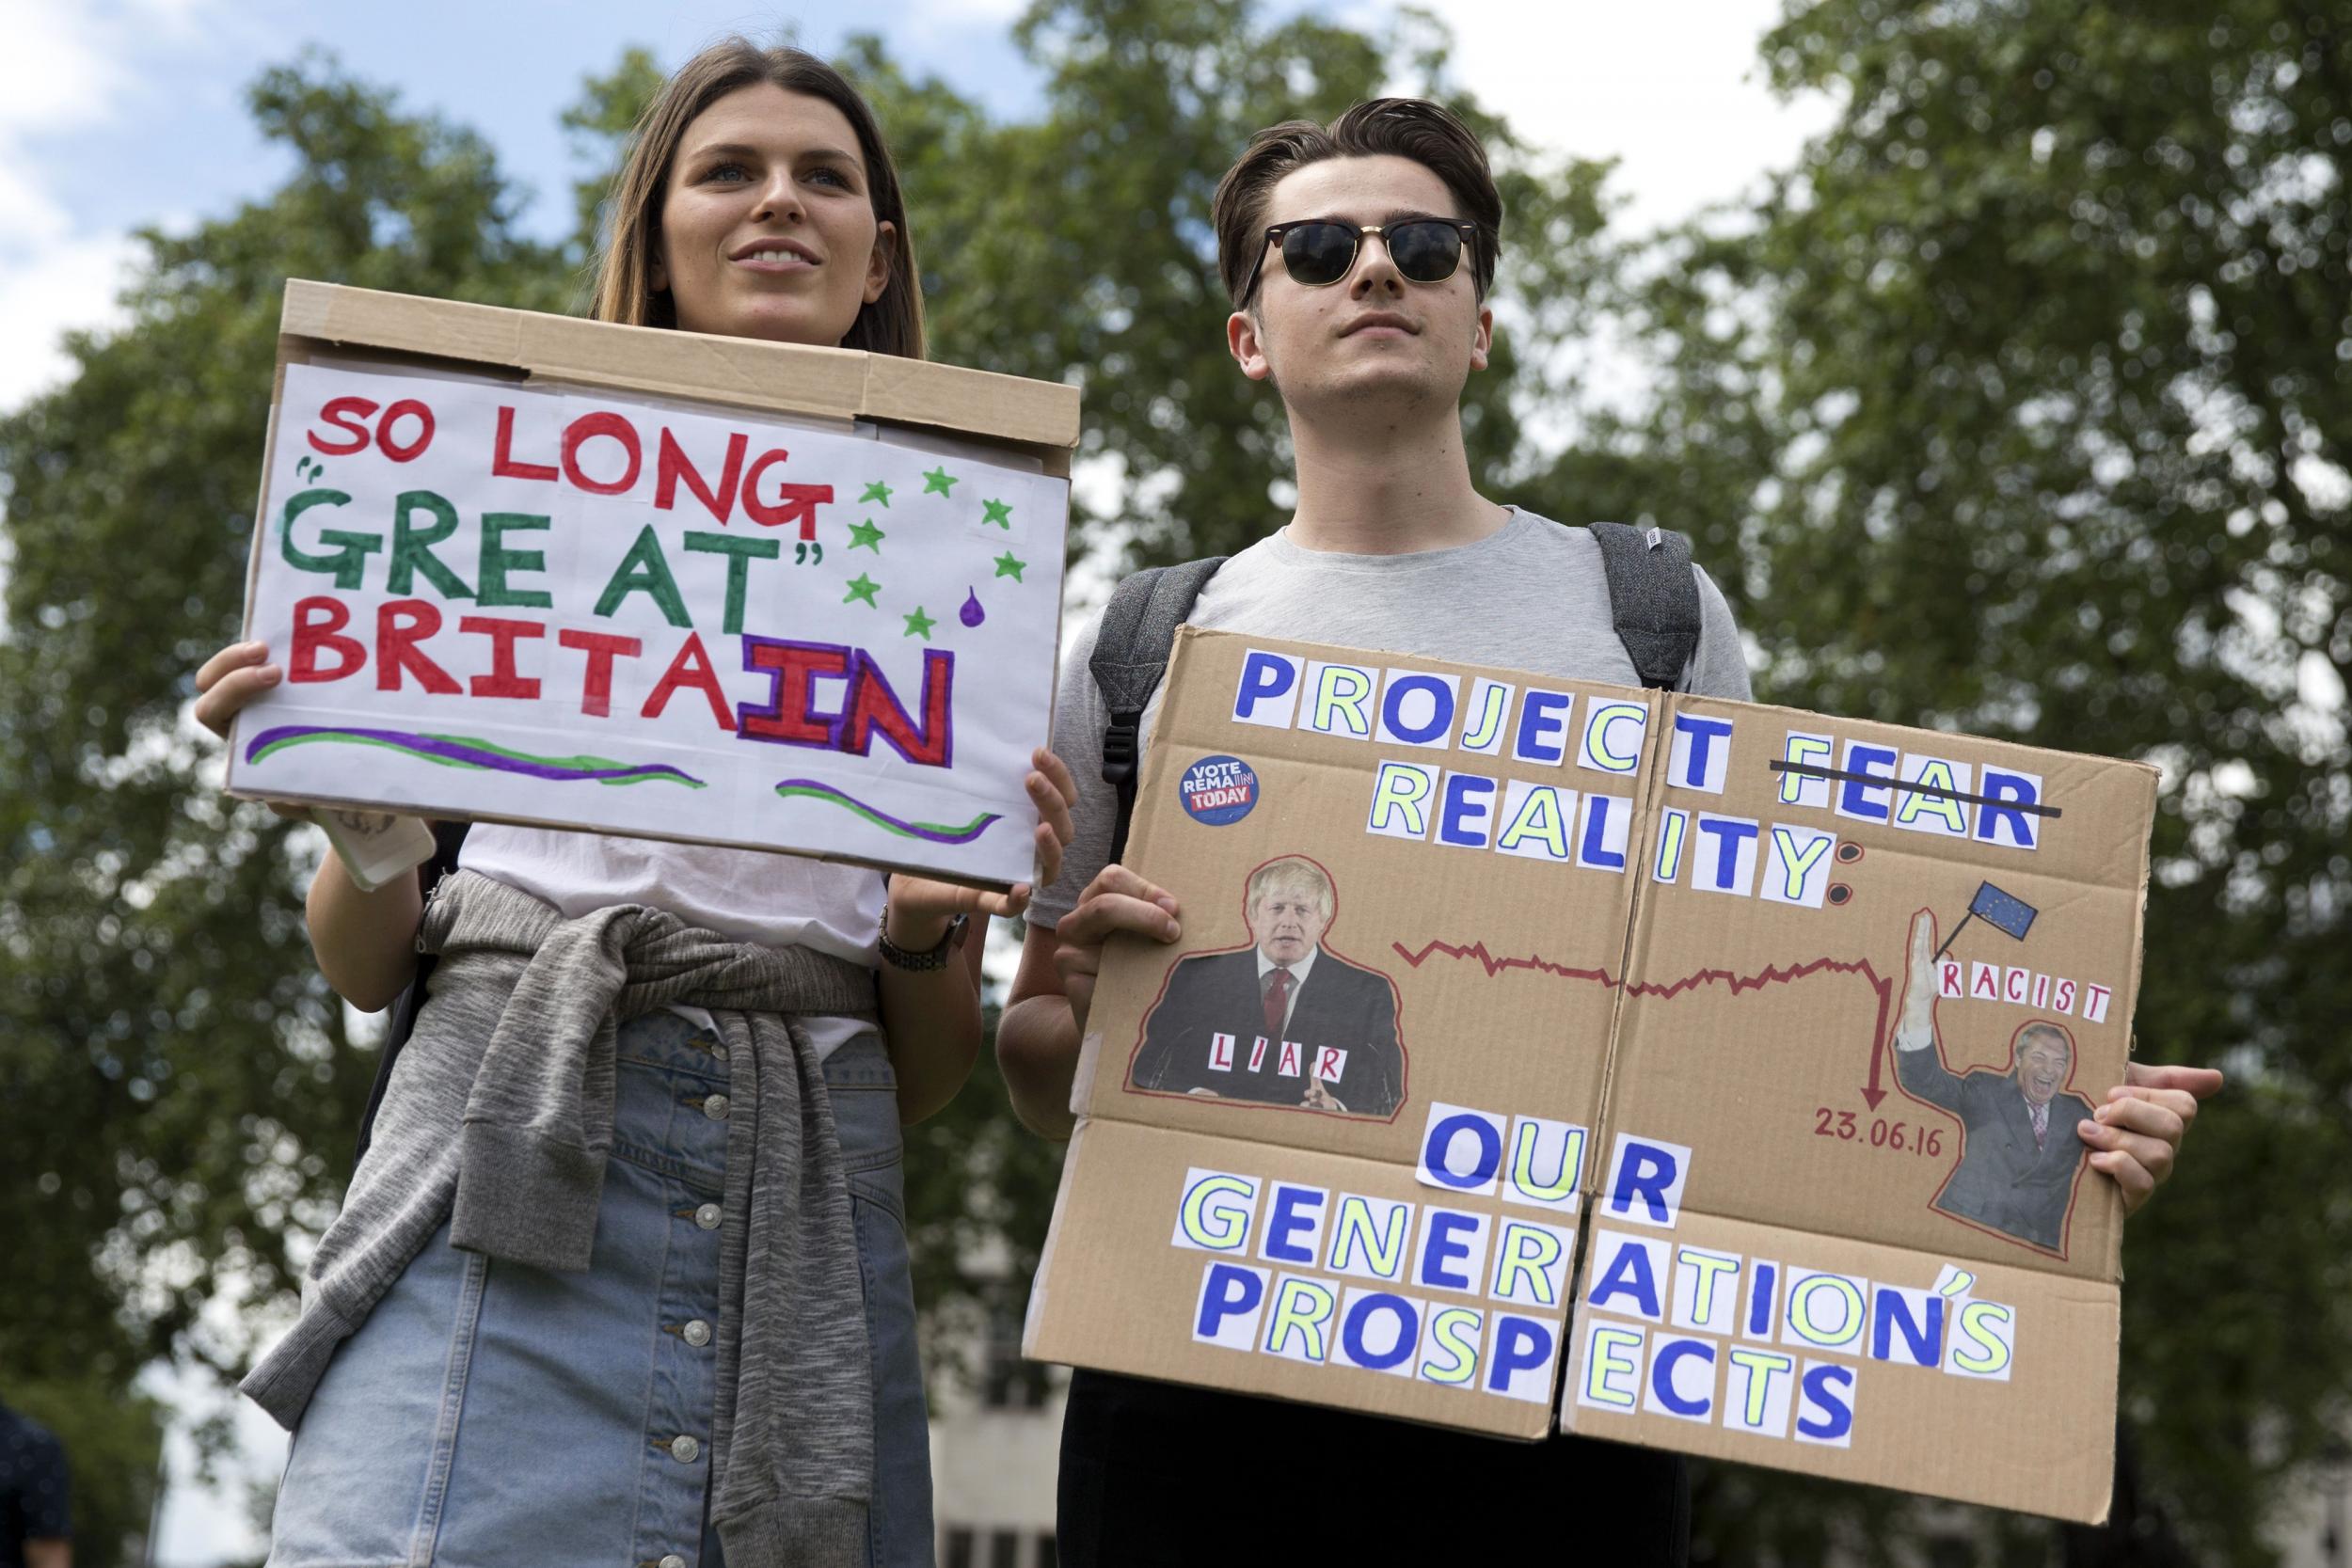 ‘The Remain side protested more in regret than rebellion, but without the (comparatively) restrained character of our politics and people we might be seeing civil disorder today’